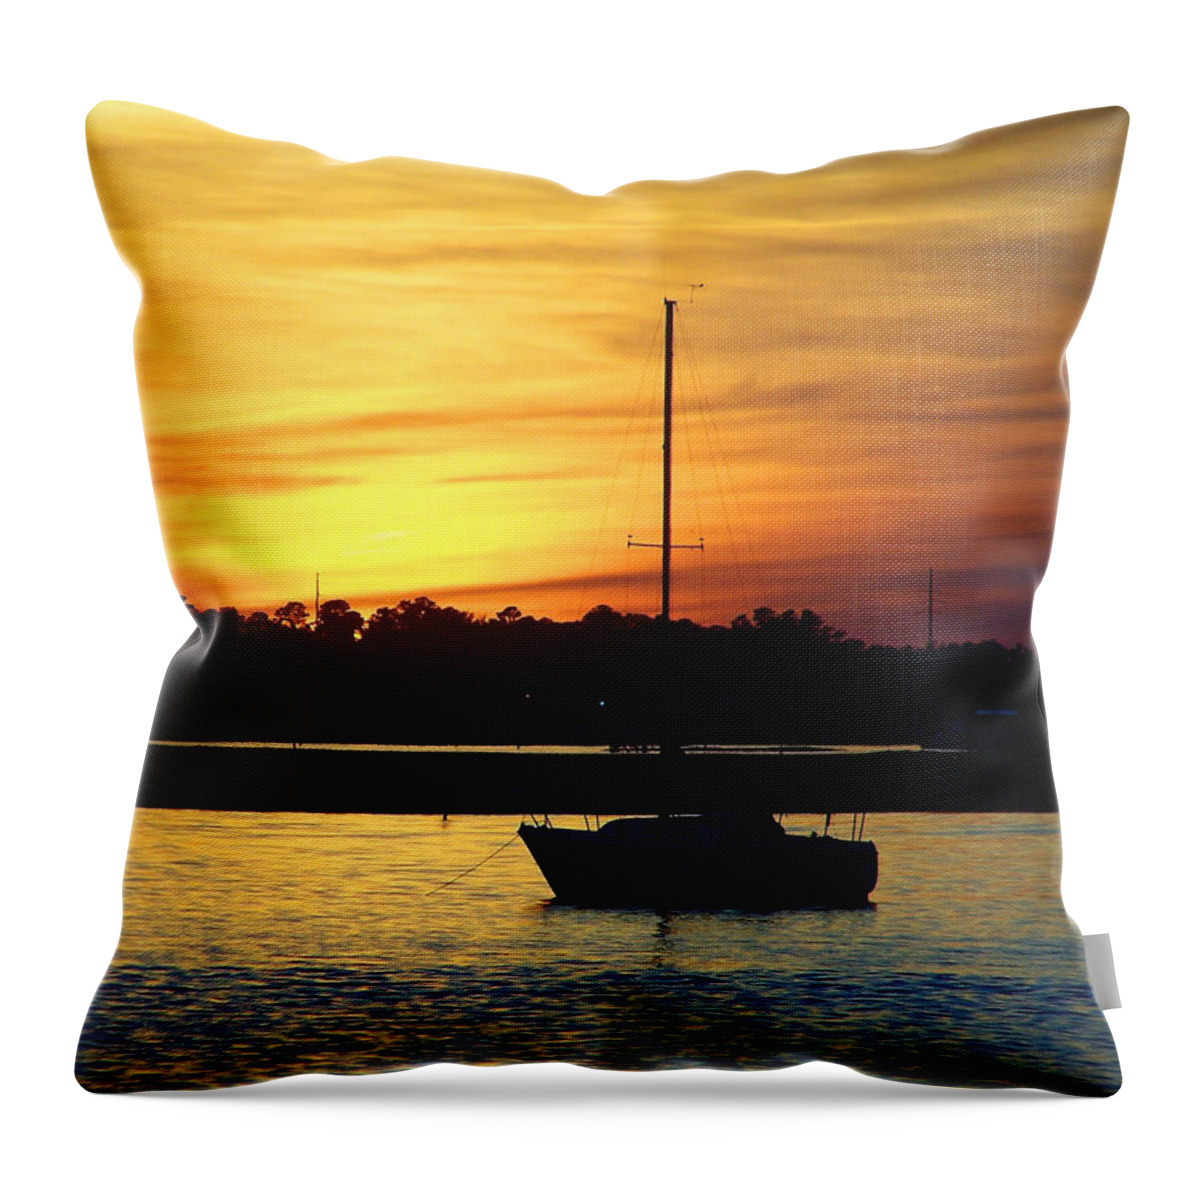 Sailboat Throw Pillow featuring the photograph Resting In A Mango Sunset by Sandi OReilly